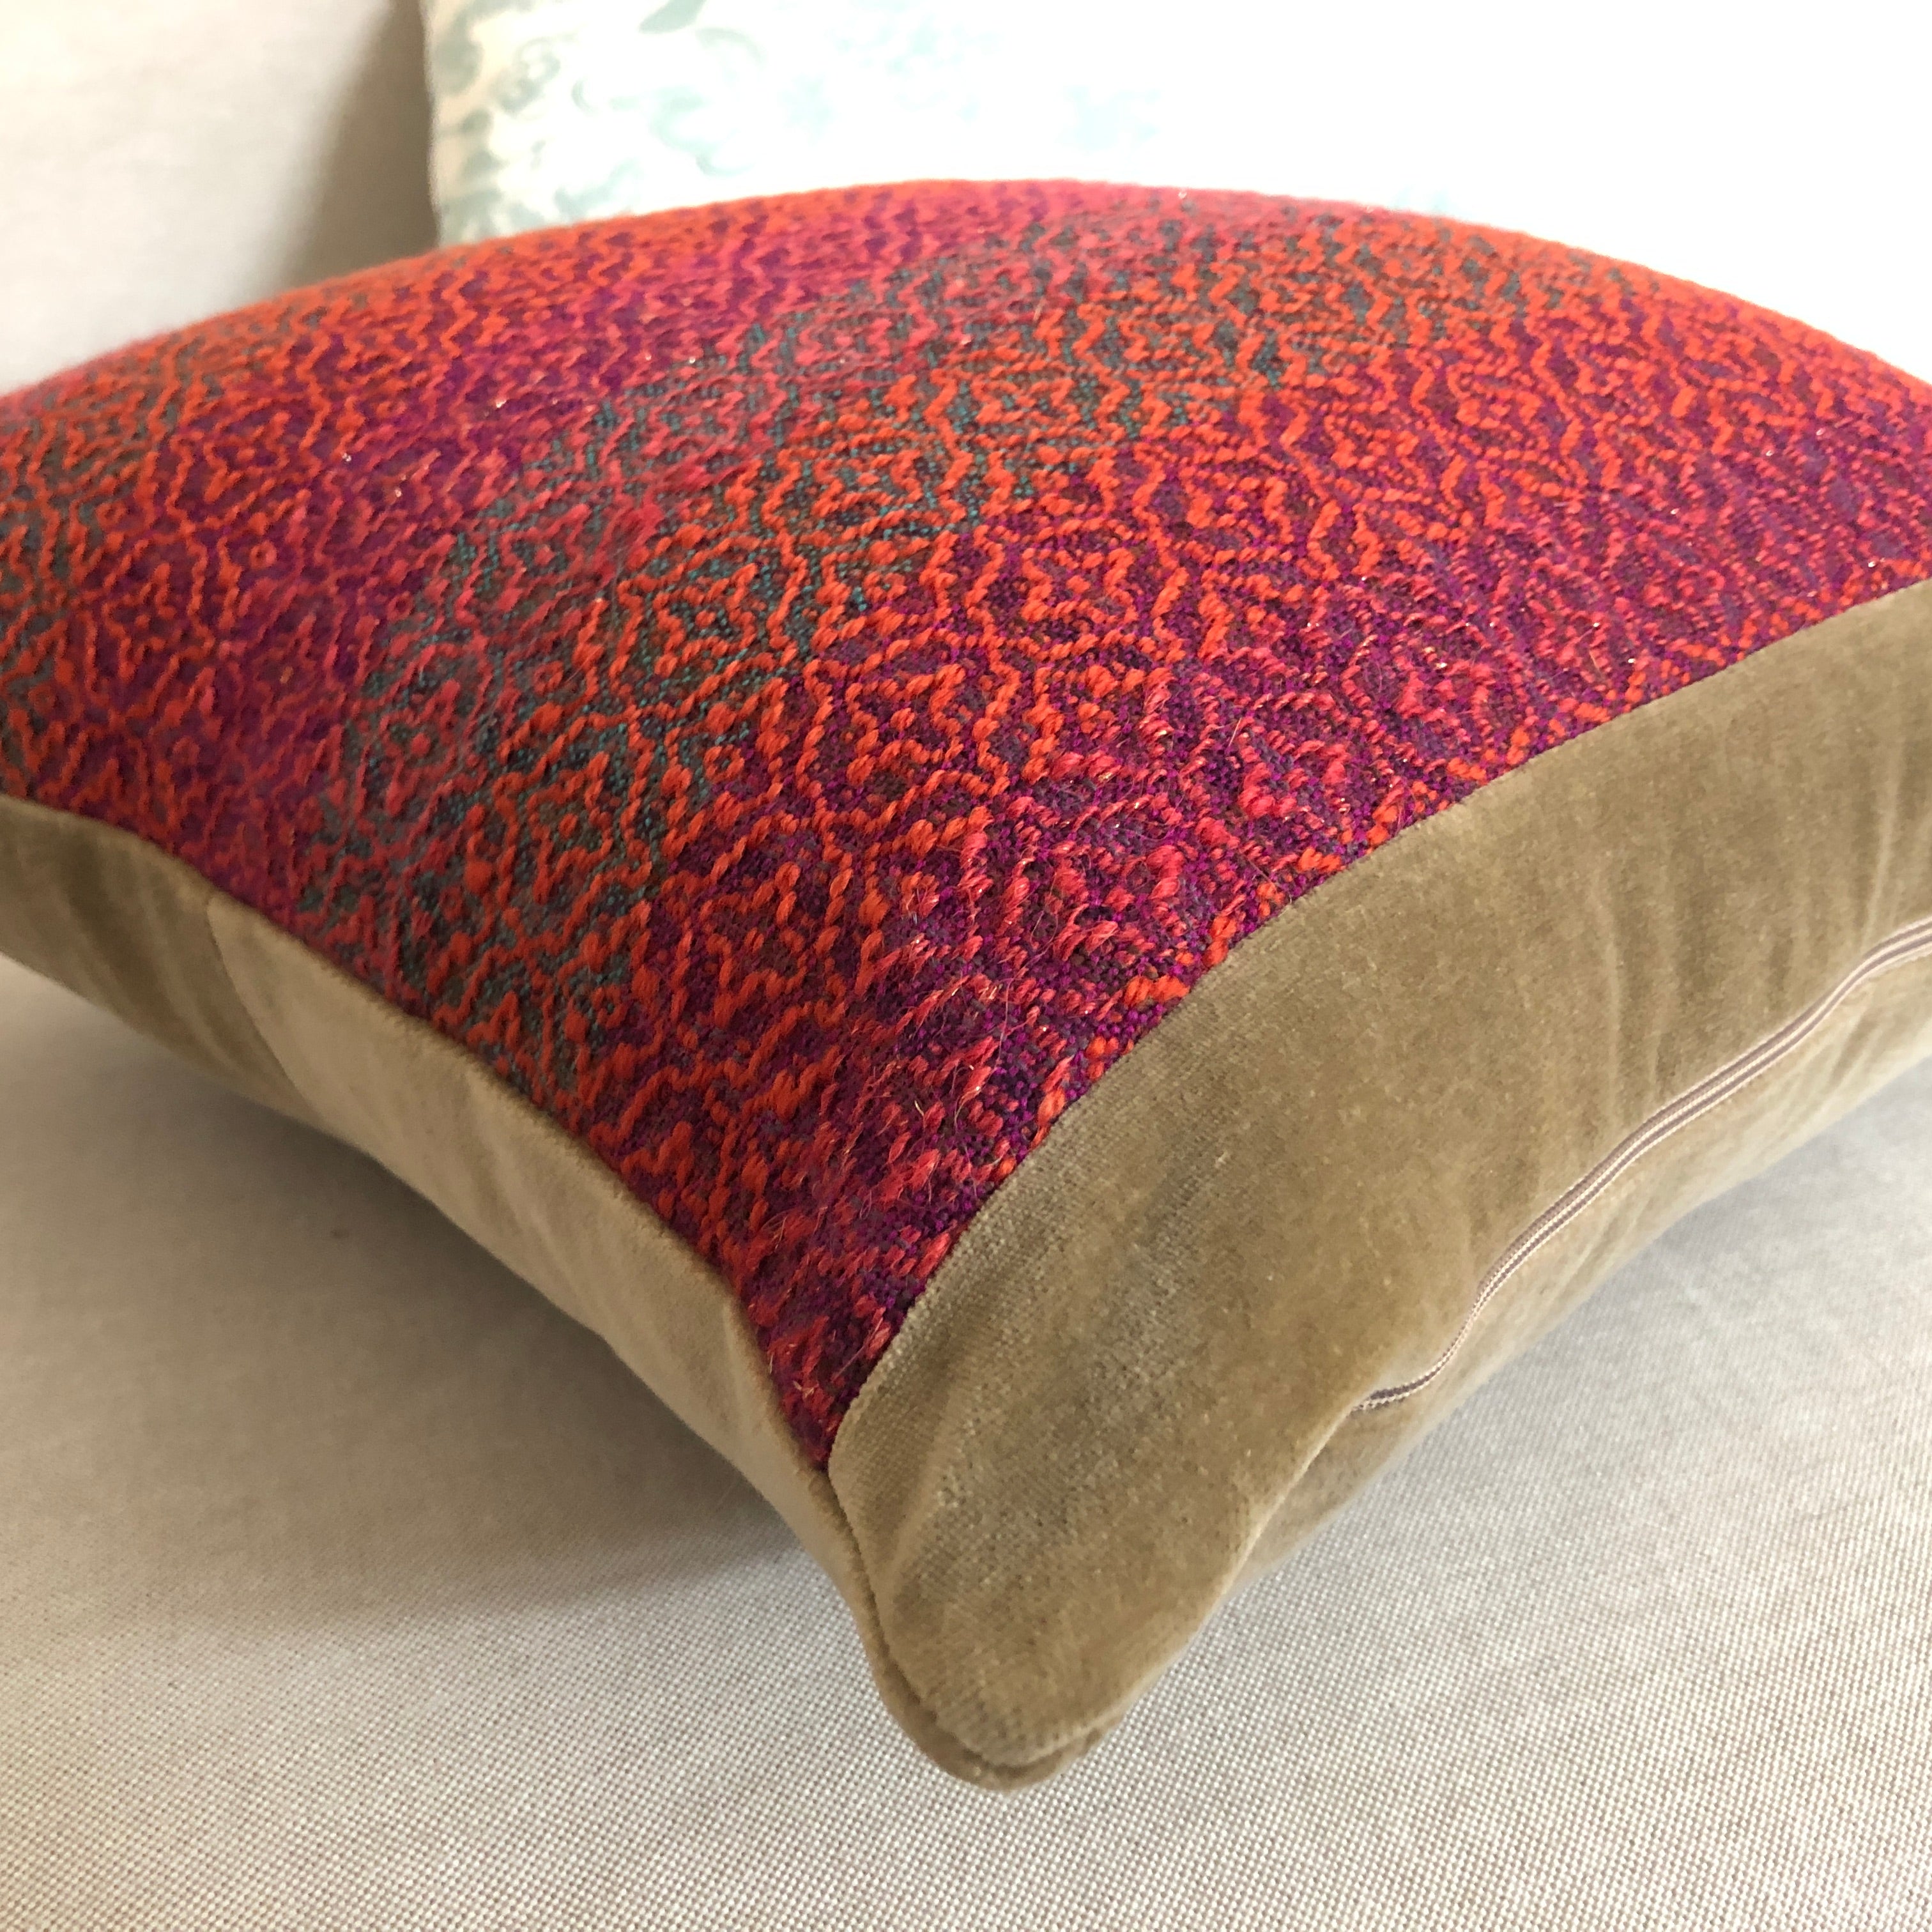 Flame - Handwoven Pillow Cover, Wool & Cotton